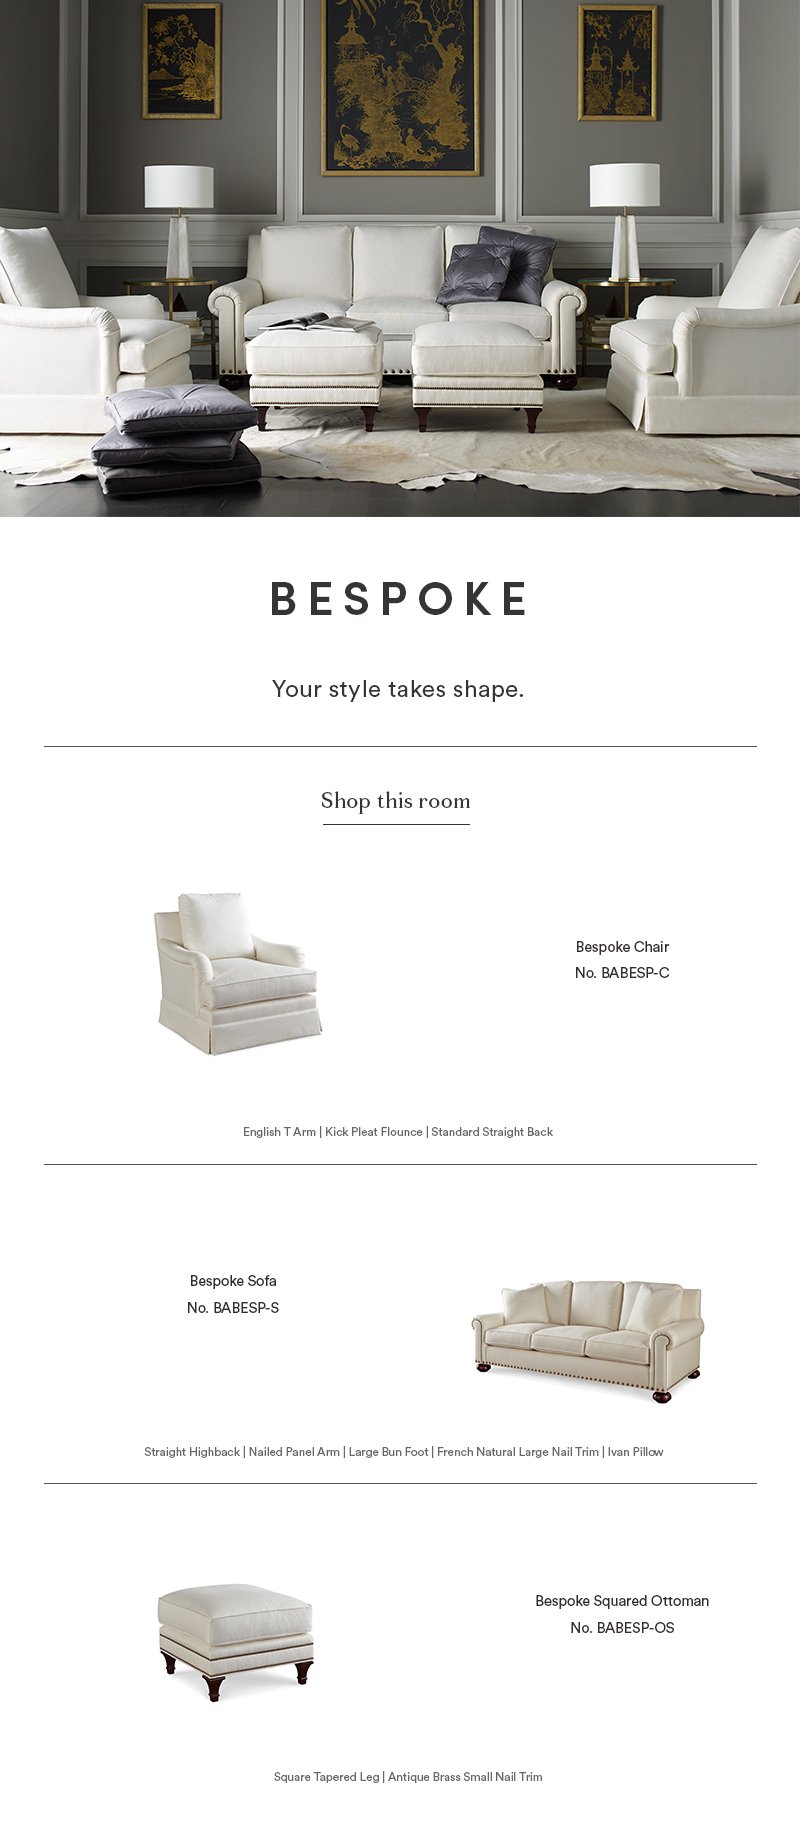 Bespoke: Your style takes shape  |  Shop this room  |  Bespoke Chair No. BABESP-C: English T Arm, Kick Pleat Flounce, Standard Straight Back  |  Bespoke Sofa No. BABESP-S: Straight Highback, Nailed Panel Arm, Large Bun Foot, French Natural Large Nail Trim, Ivan Pillow  |  Bespoke Squared Ottoman No. BABESP-OS: Square Tapered Leg, Antique Brass Small Nail Trim